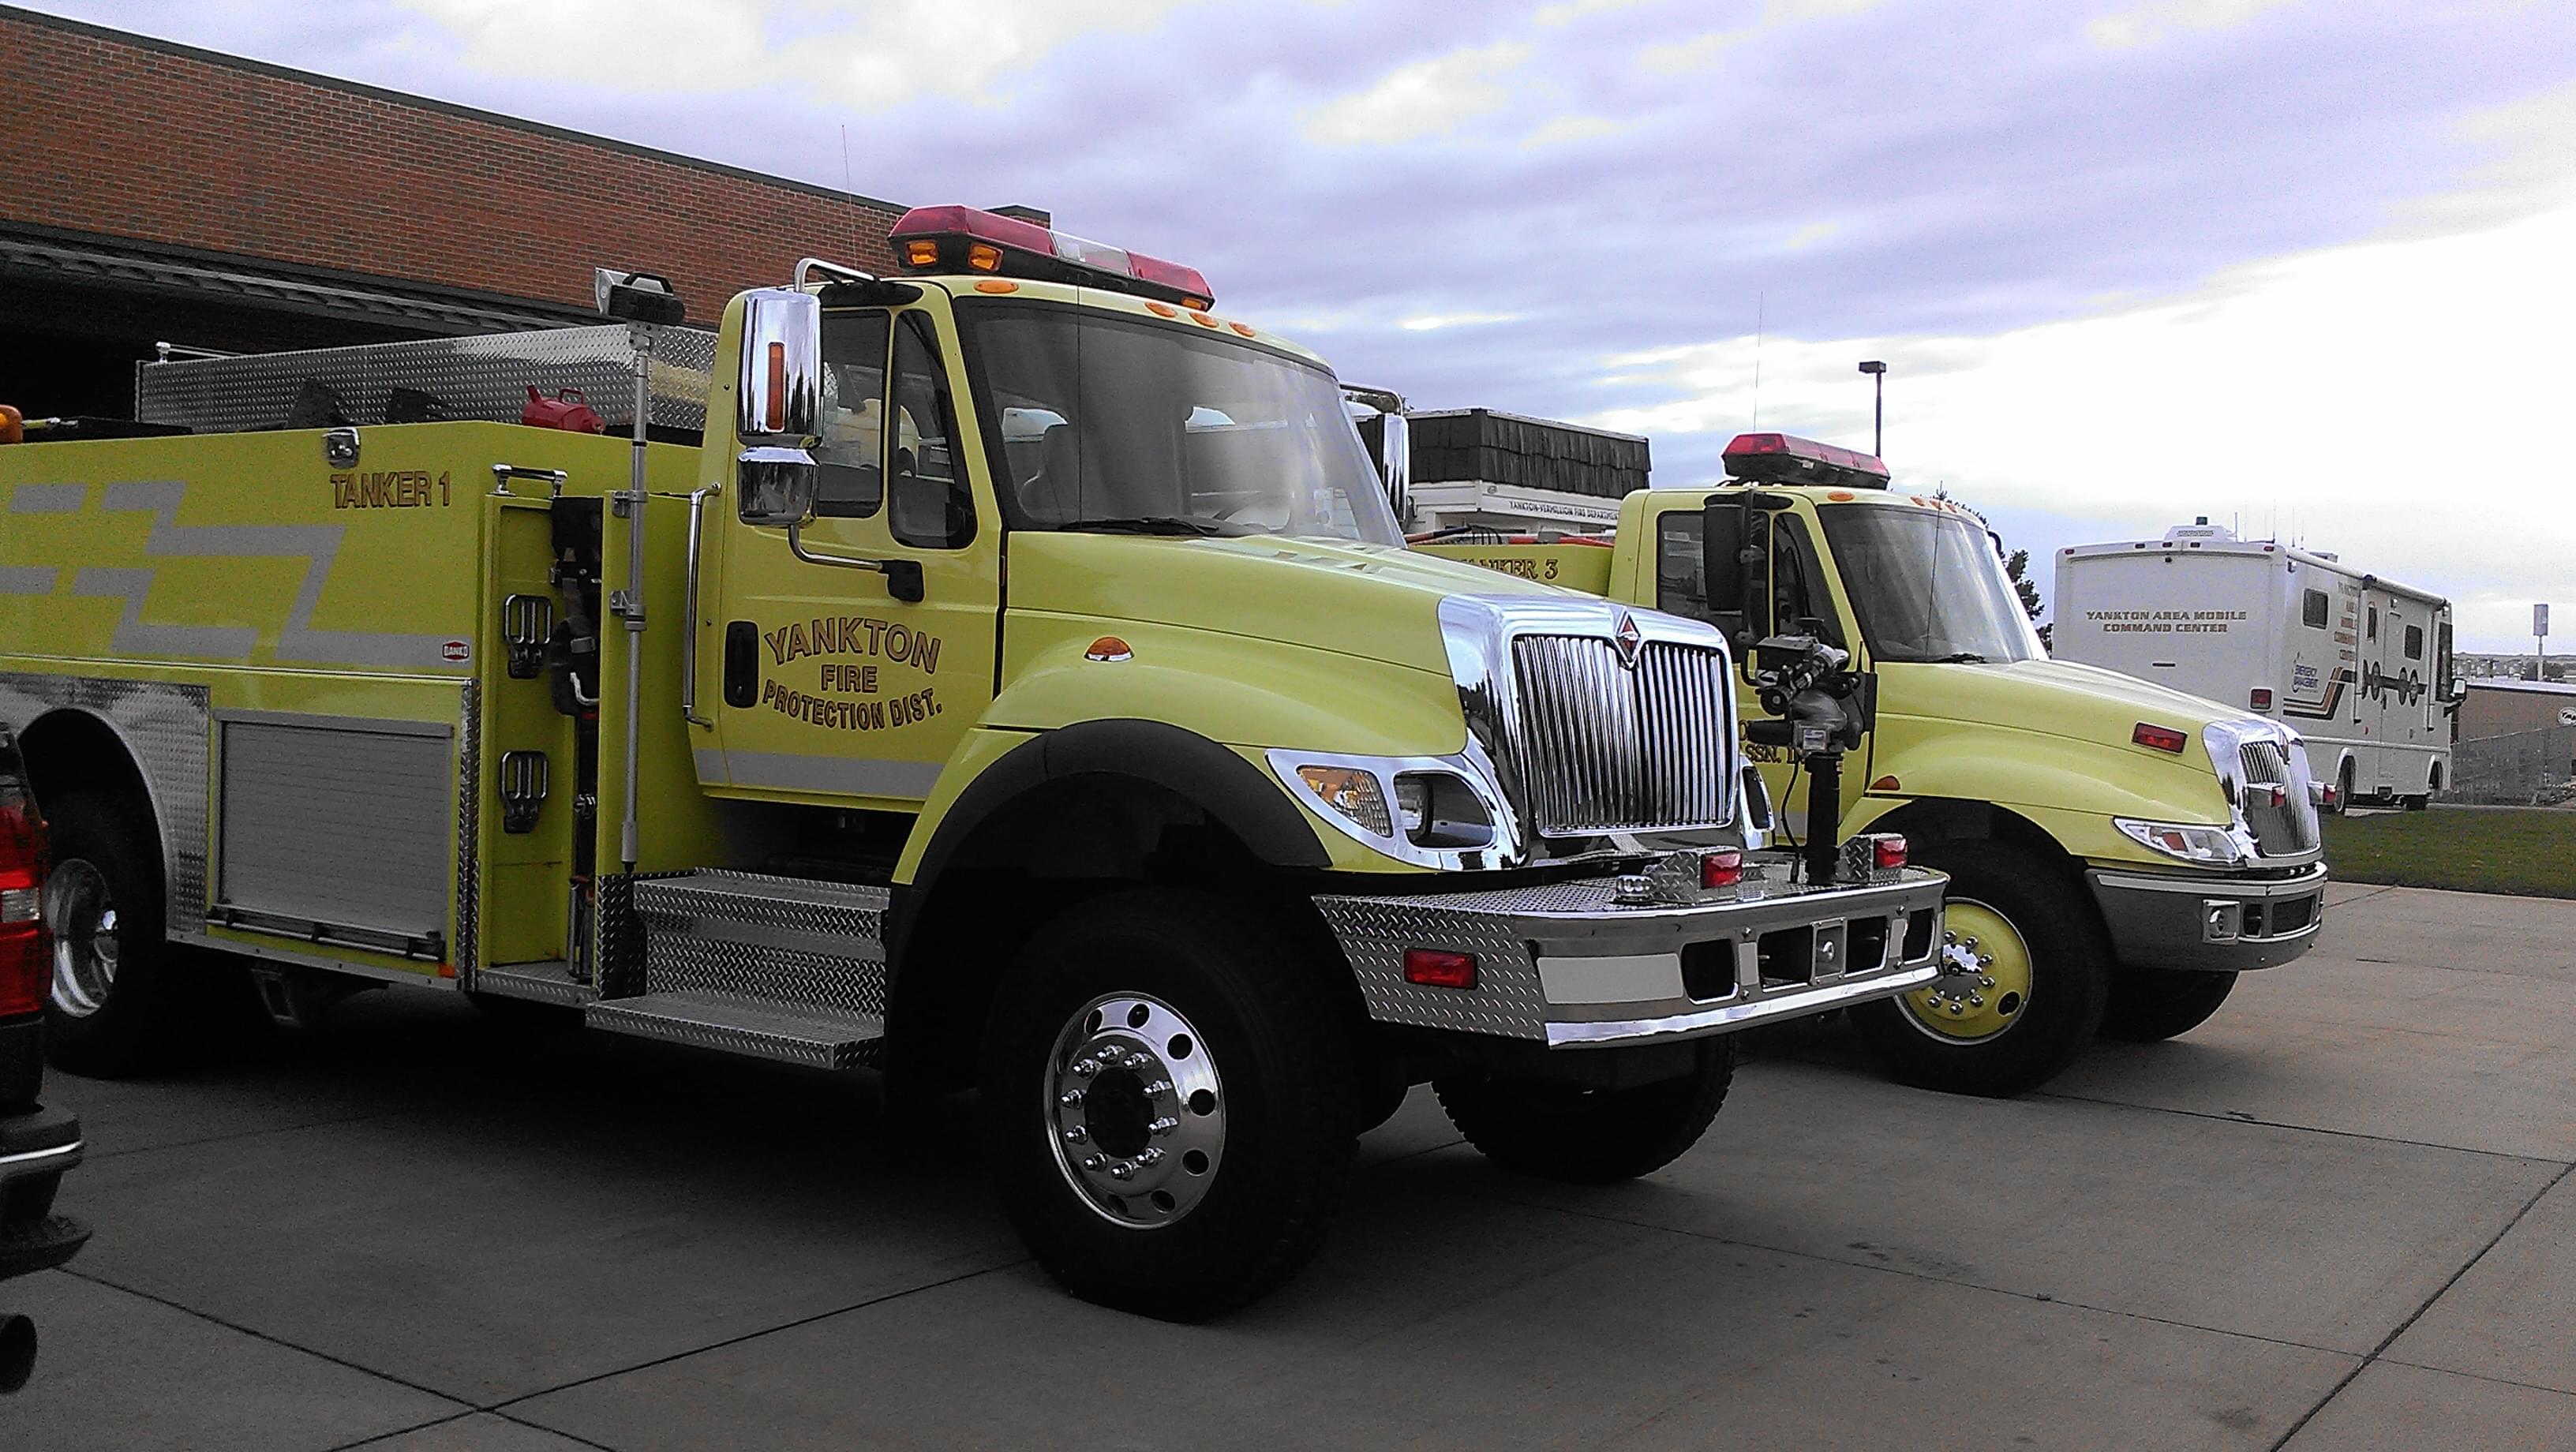 Its Fire Prevention Week In Yankton